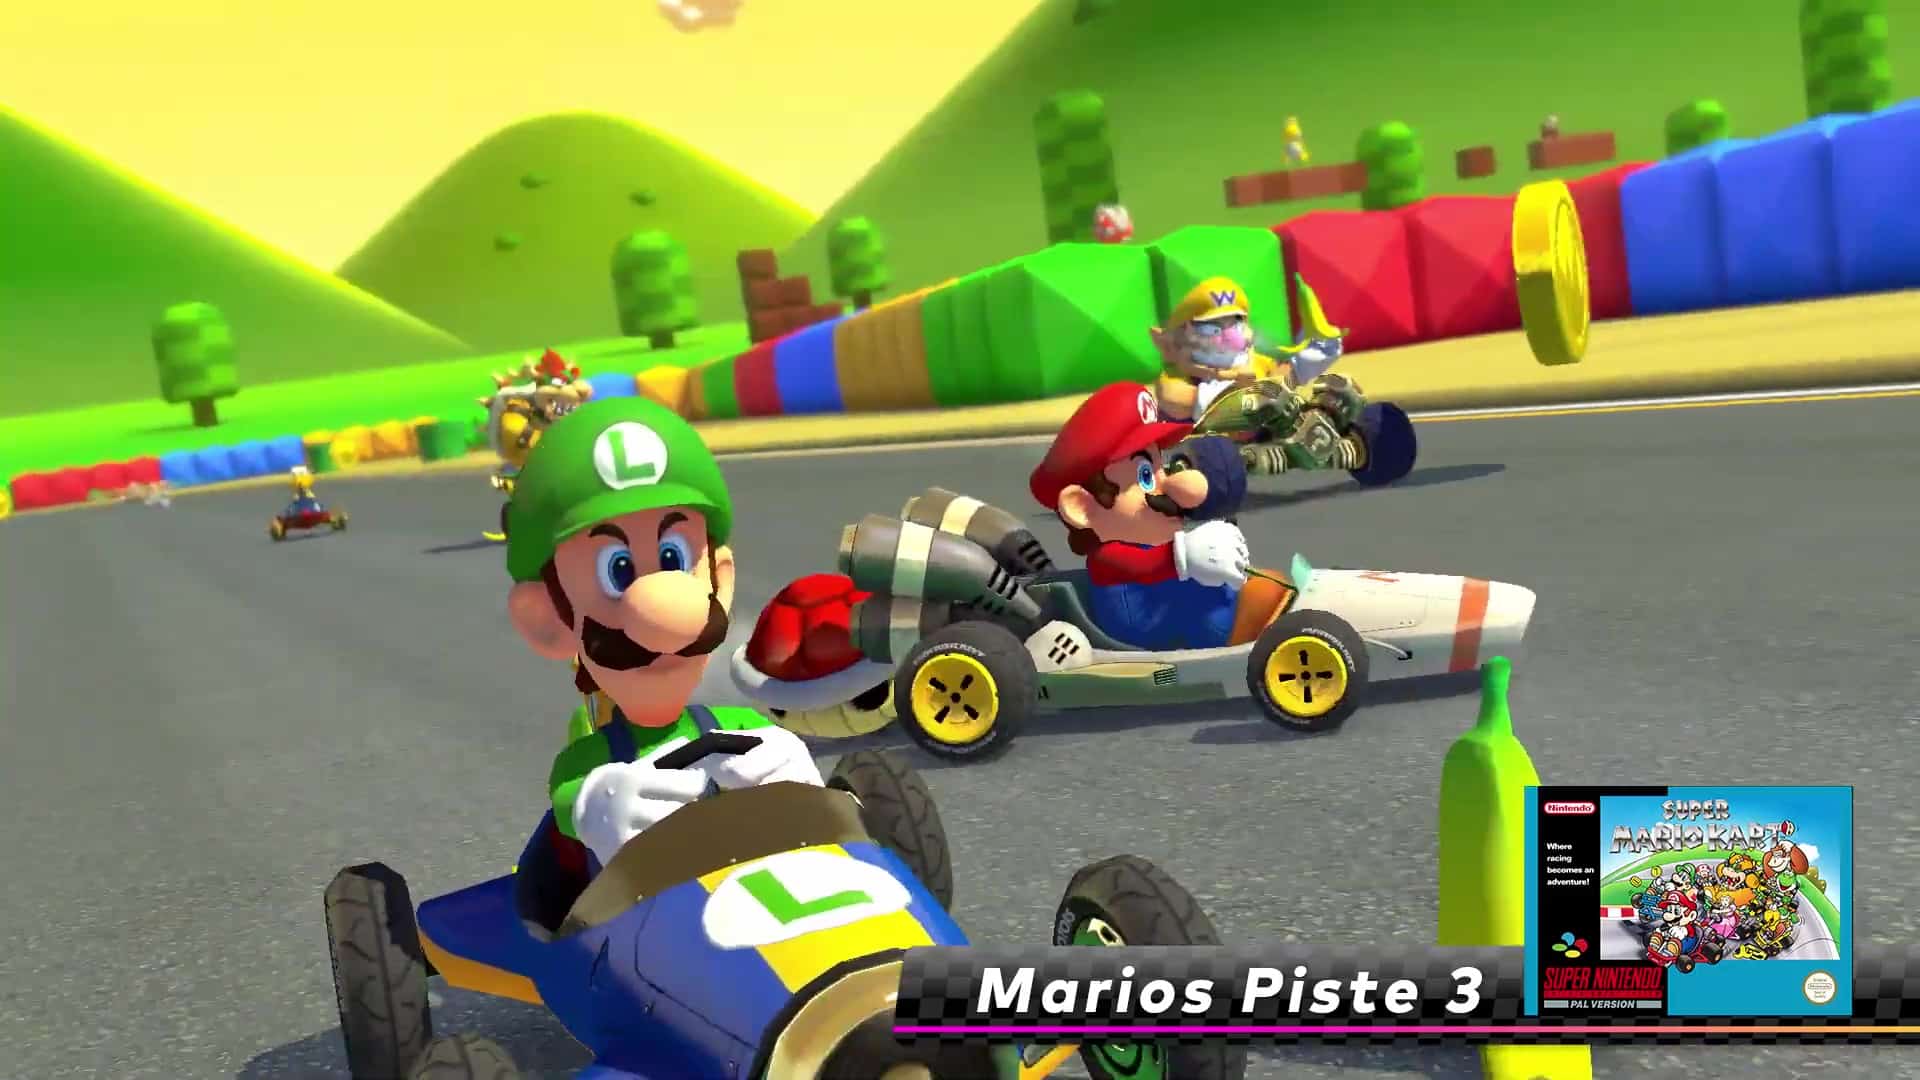 Mario Kart 8 Deluxe: Trailer shows routes from wave 2 of the DLC